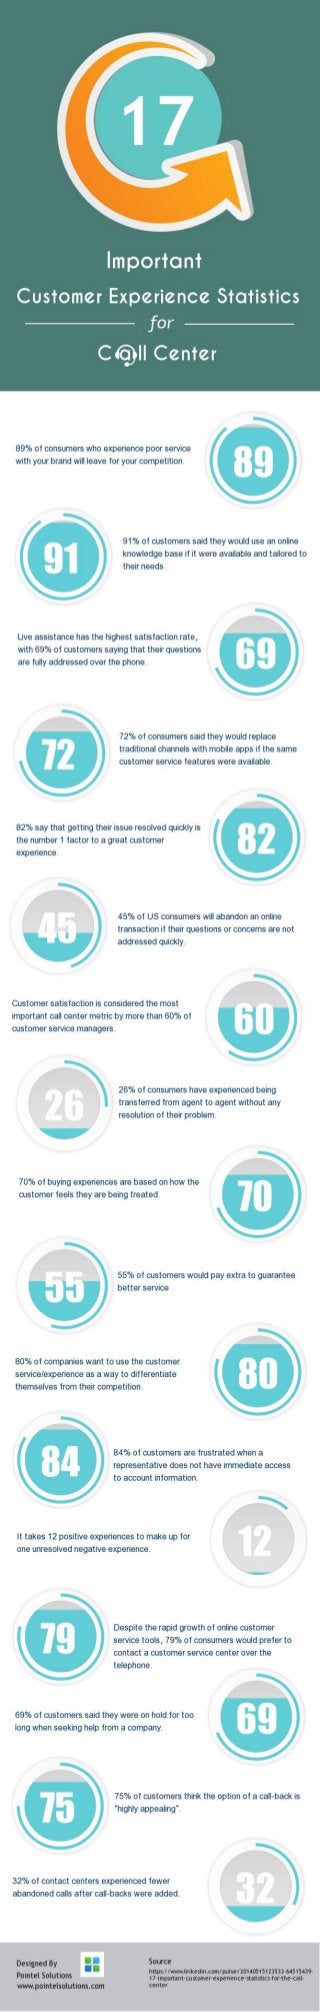 17 Important Customer Experience Statistics for the Call Center